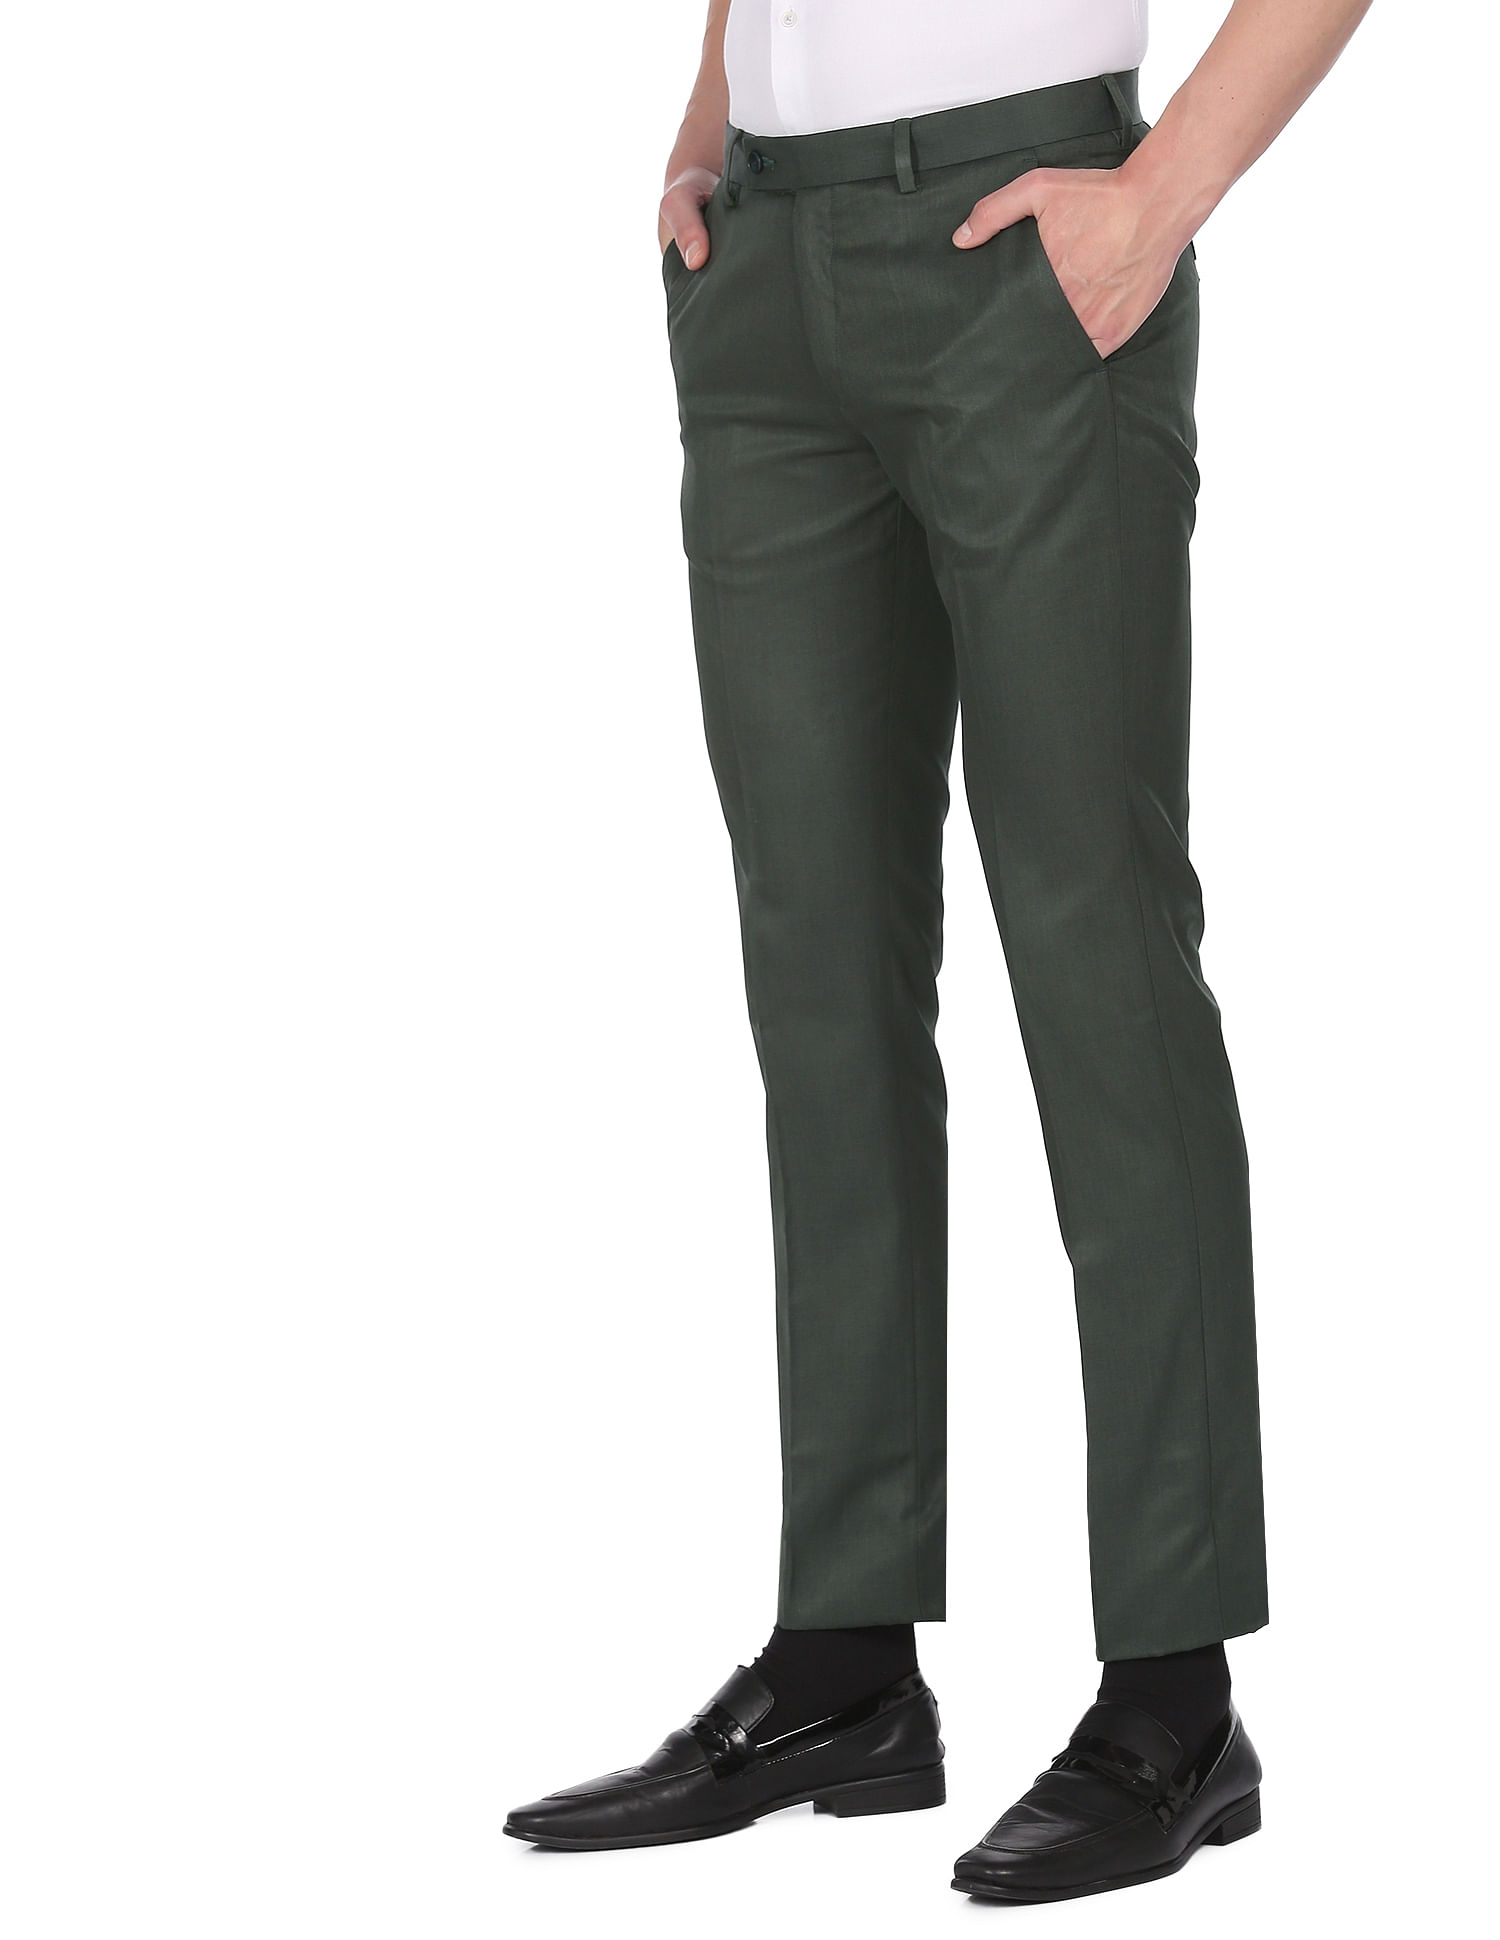 Green trousers 